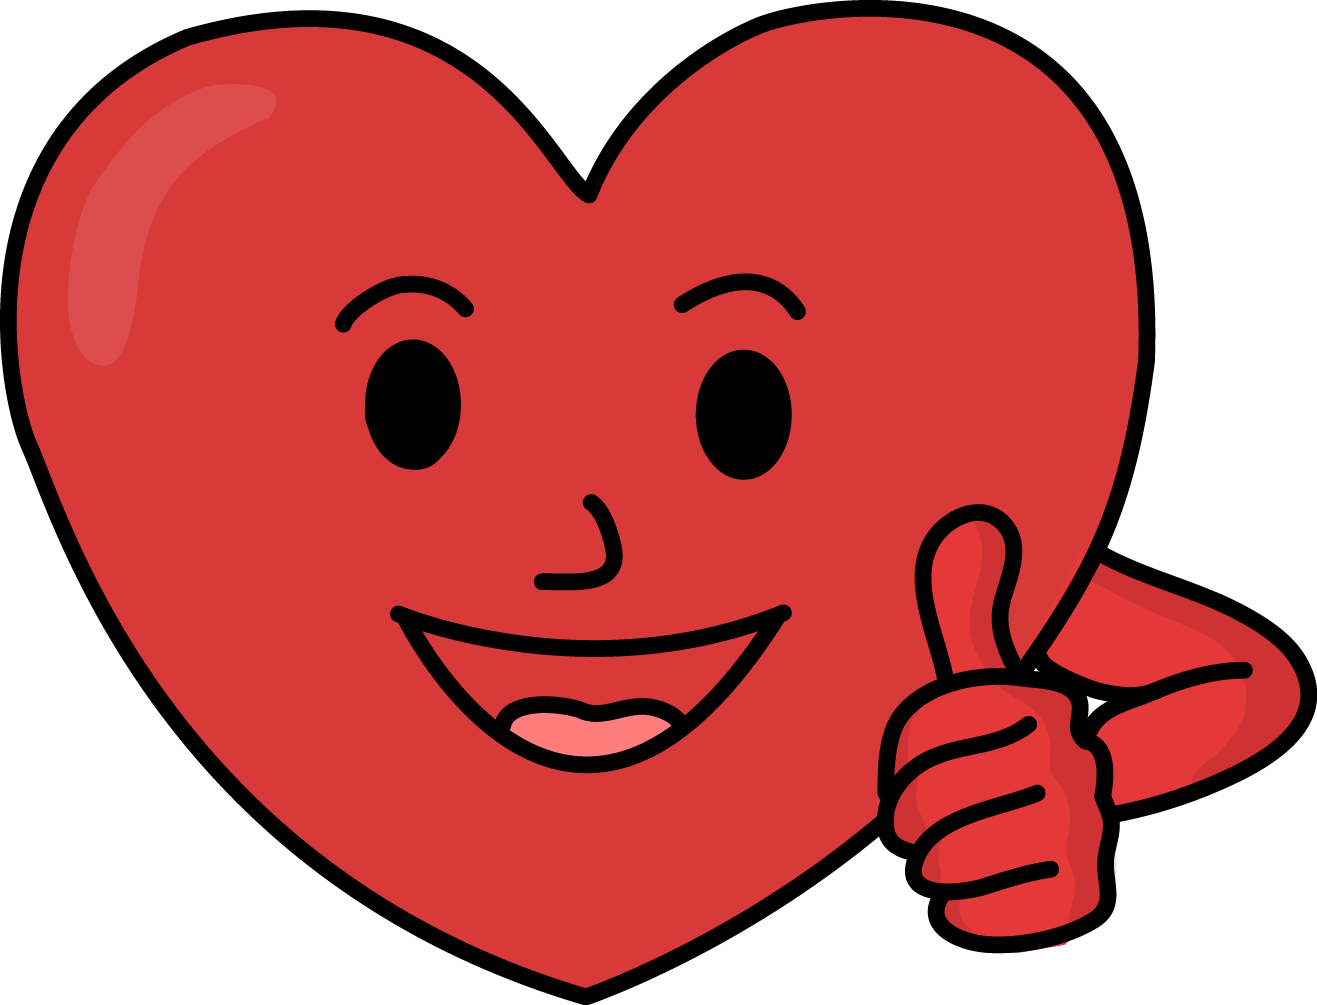 Faces clipart heart. Strong face cliparts free